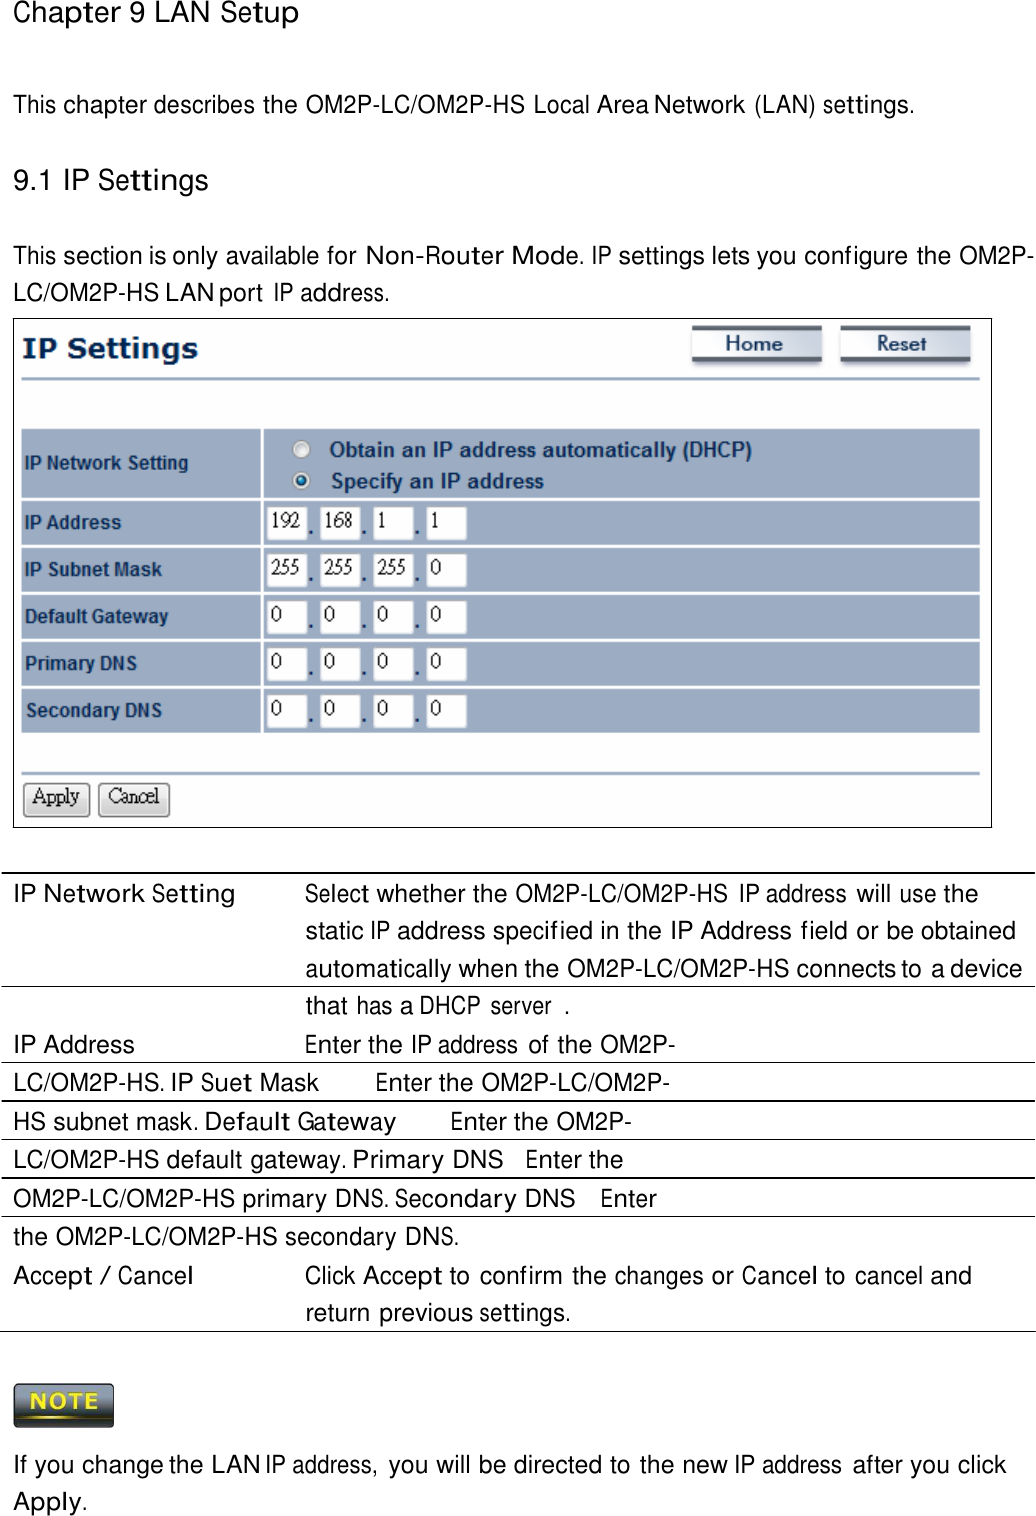 Chapter 9 LAN Setup     This chapter describes the OM2P-LC/OM2P-HS Local Area Network (LAN) settings.   9.1 IP Settings   This section is only available for Non-Router Mode. IP settings lets you configure the OM2P-LC/OM2P-HS LAN port IP address.                            IP Network Setting Select whether the OM2P-LC/OM2P-HS  IP address will use the static IP address specif ied in the IP Address field or be obtained automatically when the OM2P-LC/OM2P-HS connects to a device that has a DHCP  server  . IP Address  Enter the IP address of the OM2P-LC/OM2P-HS. IP Suet Mask  Enter the OM2P-LC/OM2P-HS subnet mask. Default Gateway Enter the OM2P-LC/OM2P-HS default gateway. Primary DNS  Enter the OM2P-LC/OM2P-HS primary DNS. Secondary DNS  Enter the OM2P-LC/OM2P-HS secondary DNS. Accept / Cancel Click Accept to confirm the changes or Cancel to cancel and return previous settings.      If you change the LAN IP address, you will be directed to the new IP address after you click Apply. 